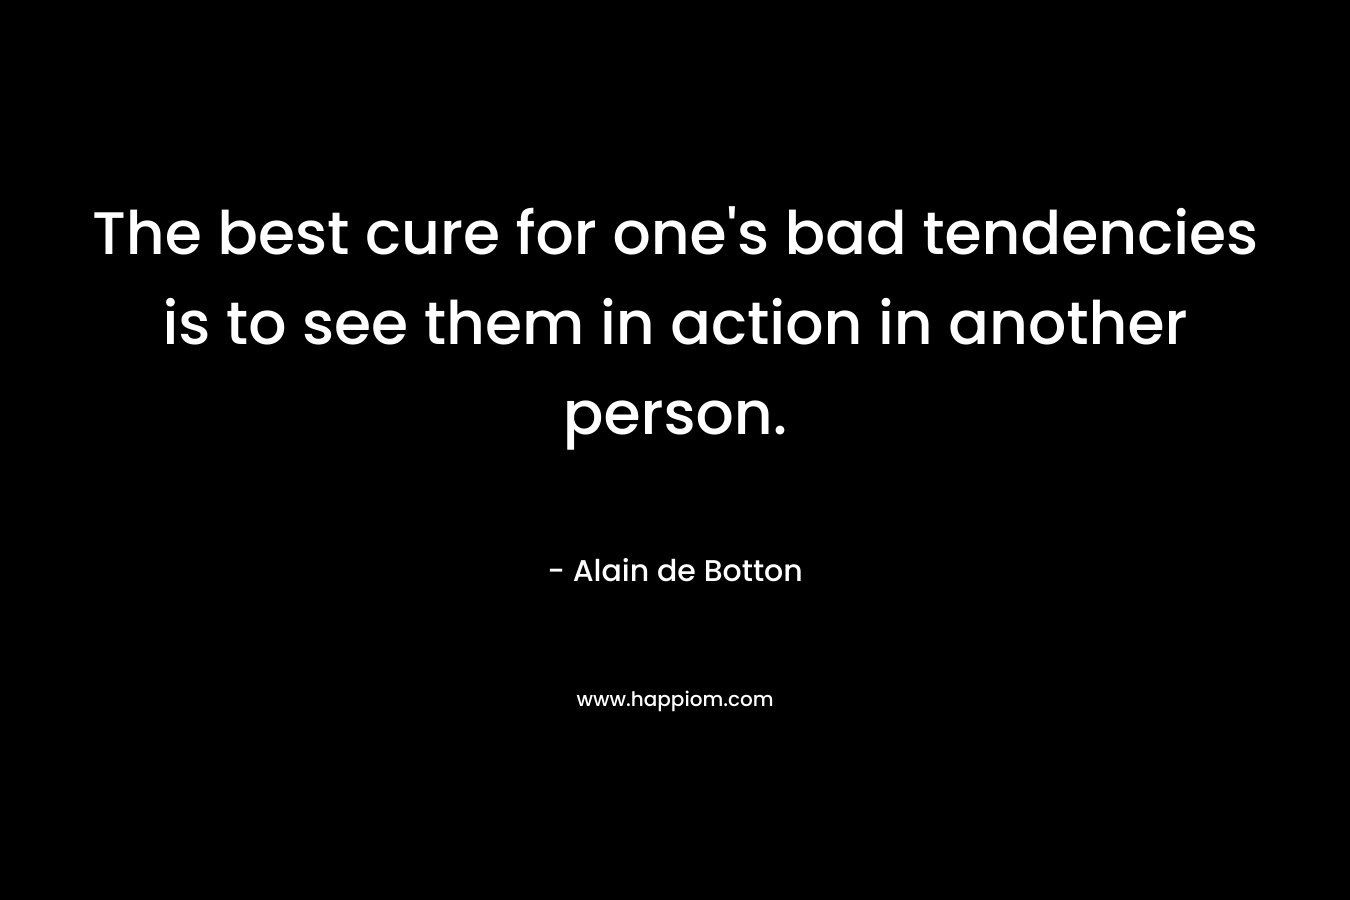 The best cure for one's bad tendencies is to see them in action in another person.